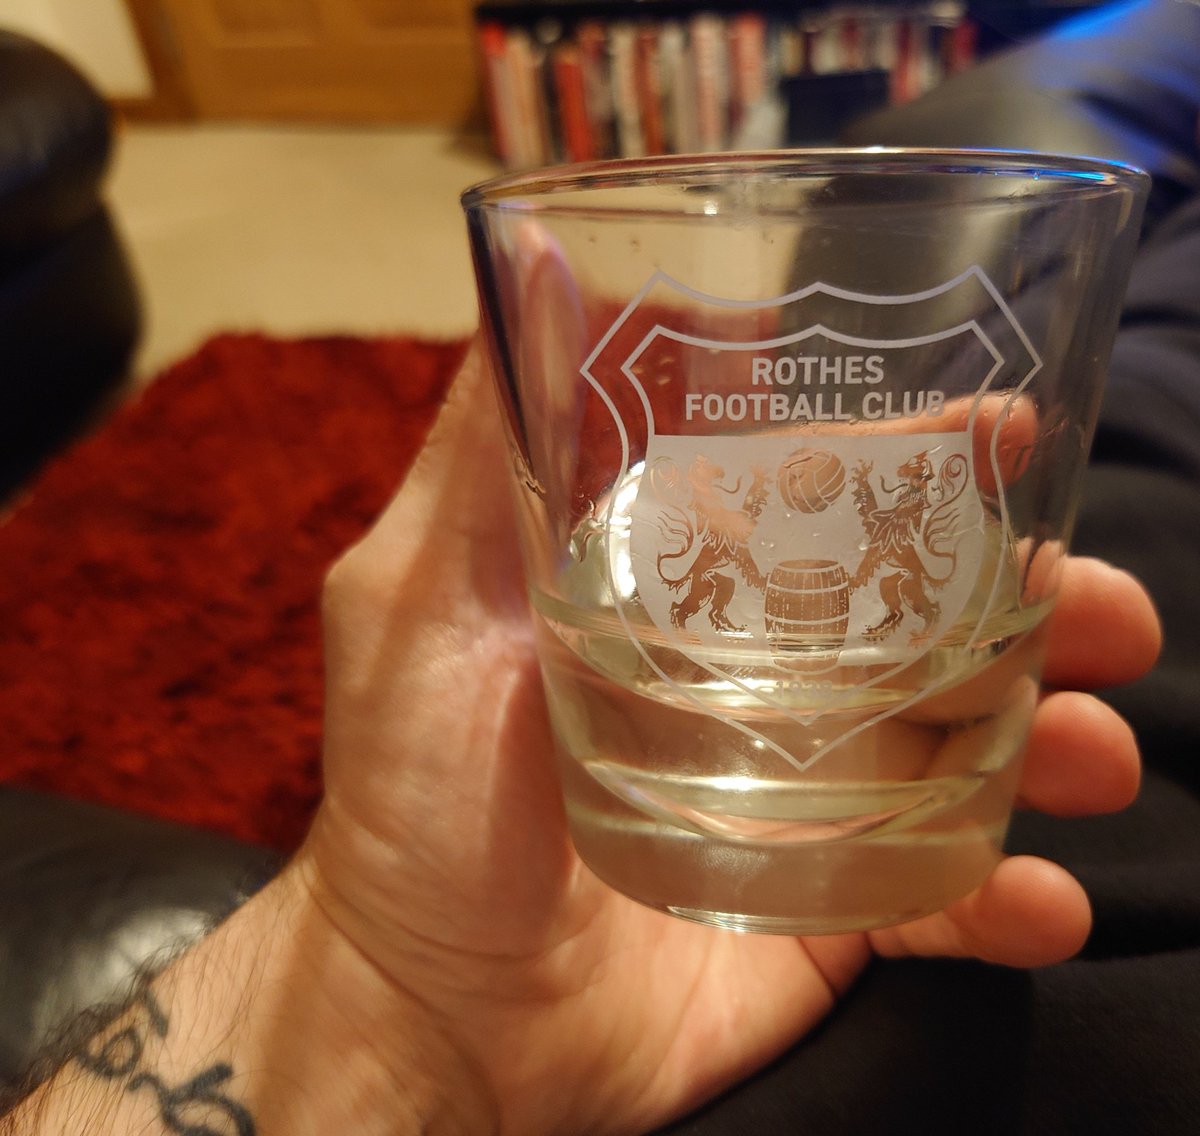 Is it wrong to drink anything other than whisky from a Rothes tummler? @RothesFC